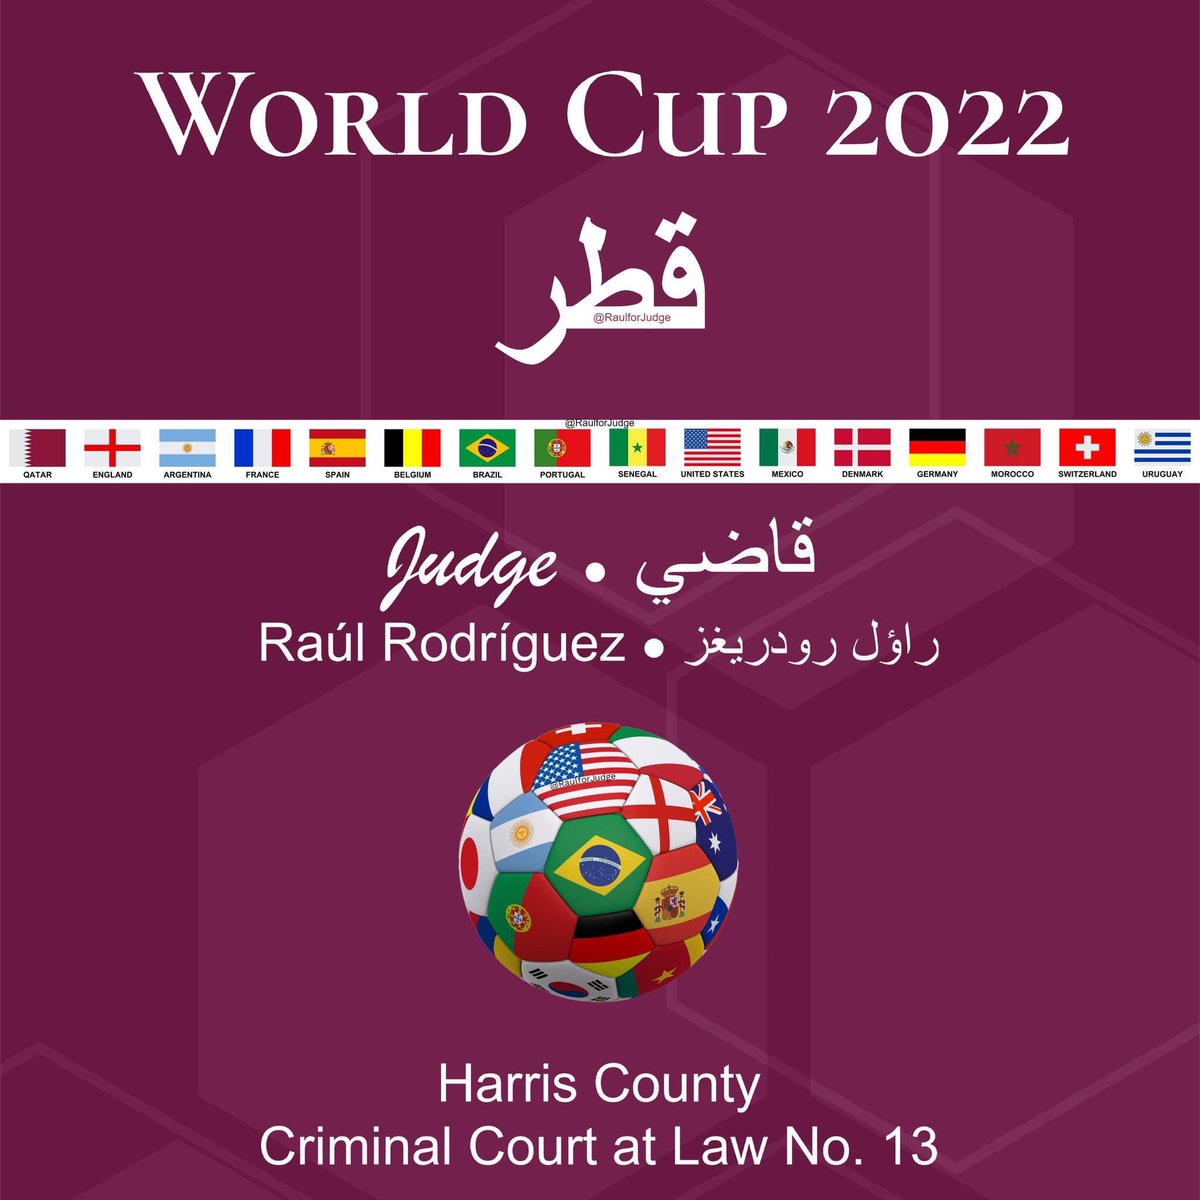 Happy #WorldCup 2022 Season! ⚽️🏆 From: قاضي راؤل رودريغز | @RaulforJudge 'The most prestigious tournament in the world. Taking place quadrennially, the FIFA Men's World Cup™ sees 32 nations compete against each other for the prize.' ~ @FIFAcom @FIFAWorldCup @fifacom_es #Qatar